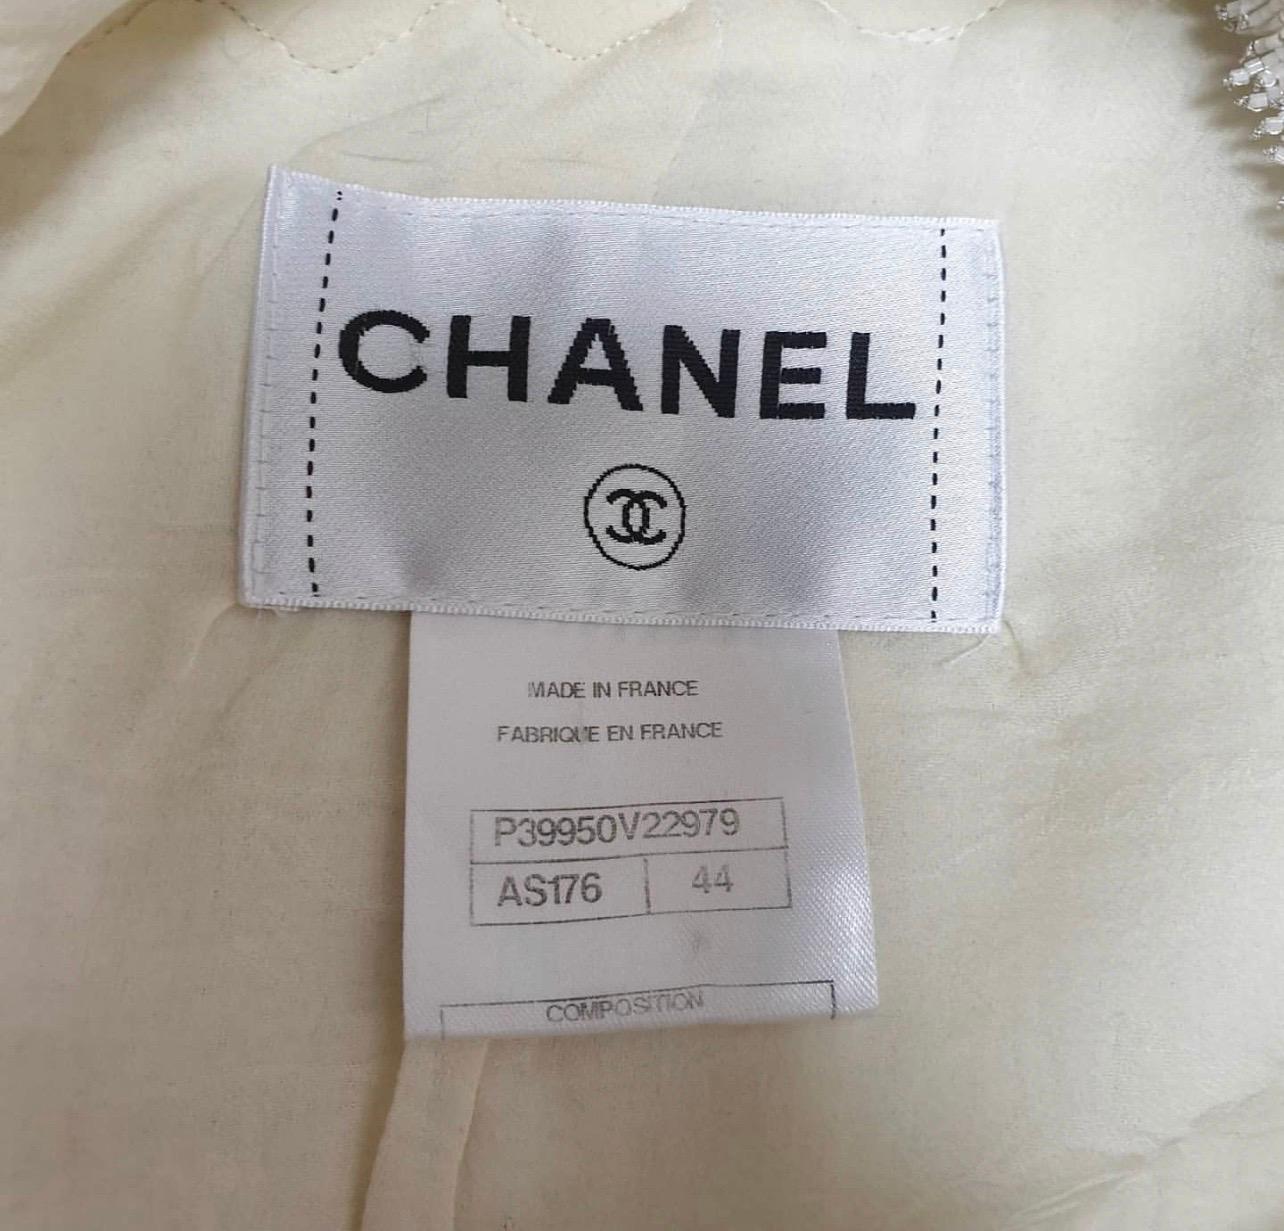 Chanel Most Wanted Ecru Tweed Jacket  and Skirt with Camellia crochet trim, beaded embellishments throughout.
Jacket has crew neck, four patch pockets, and Gripoix Gold CC logo button front closure.

From the 2011C Collection

Sz.44

Condition is